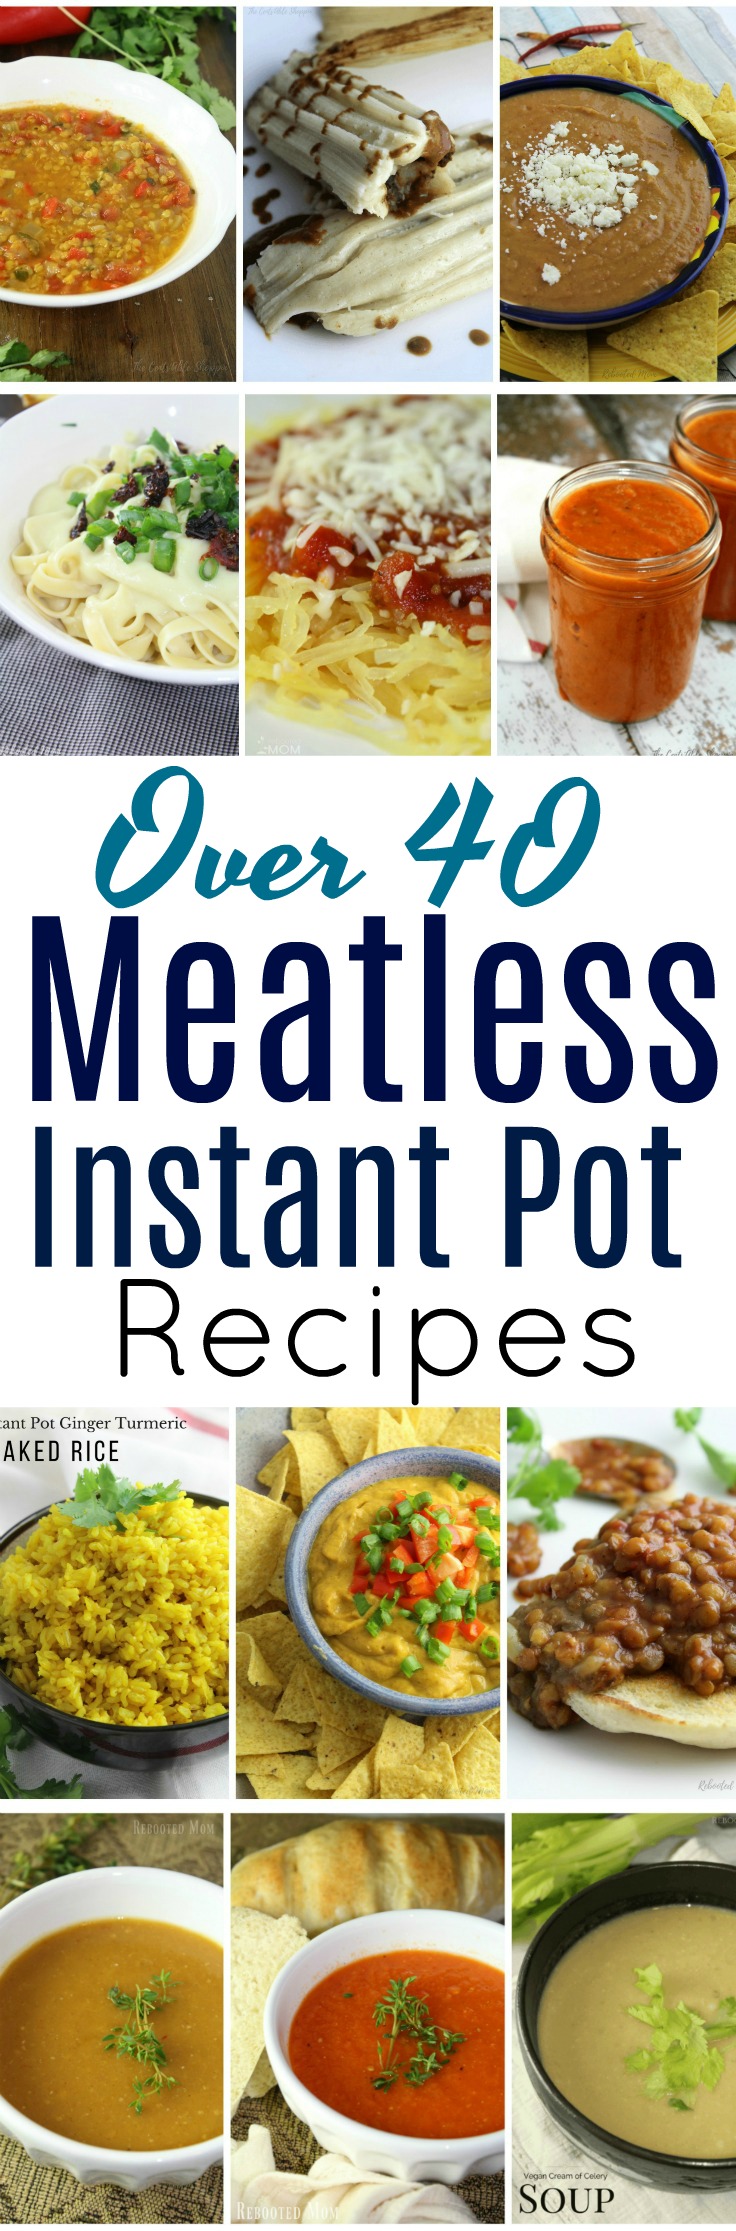 An Instant Pot can be such an incredible time saver in the kitchen! Here are over 40 Meatless Instant Pot Recipes to add to your meal rotation! #InstantPot #PressureCooker #Meatless